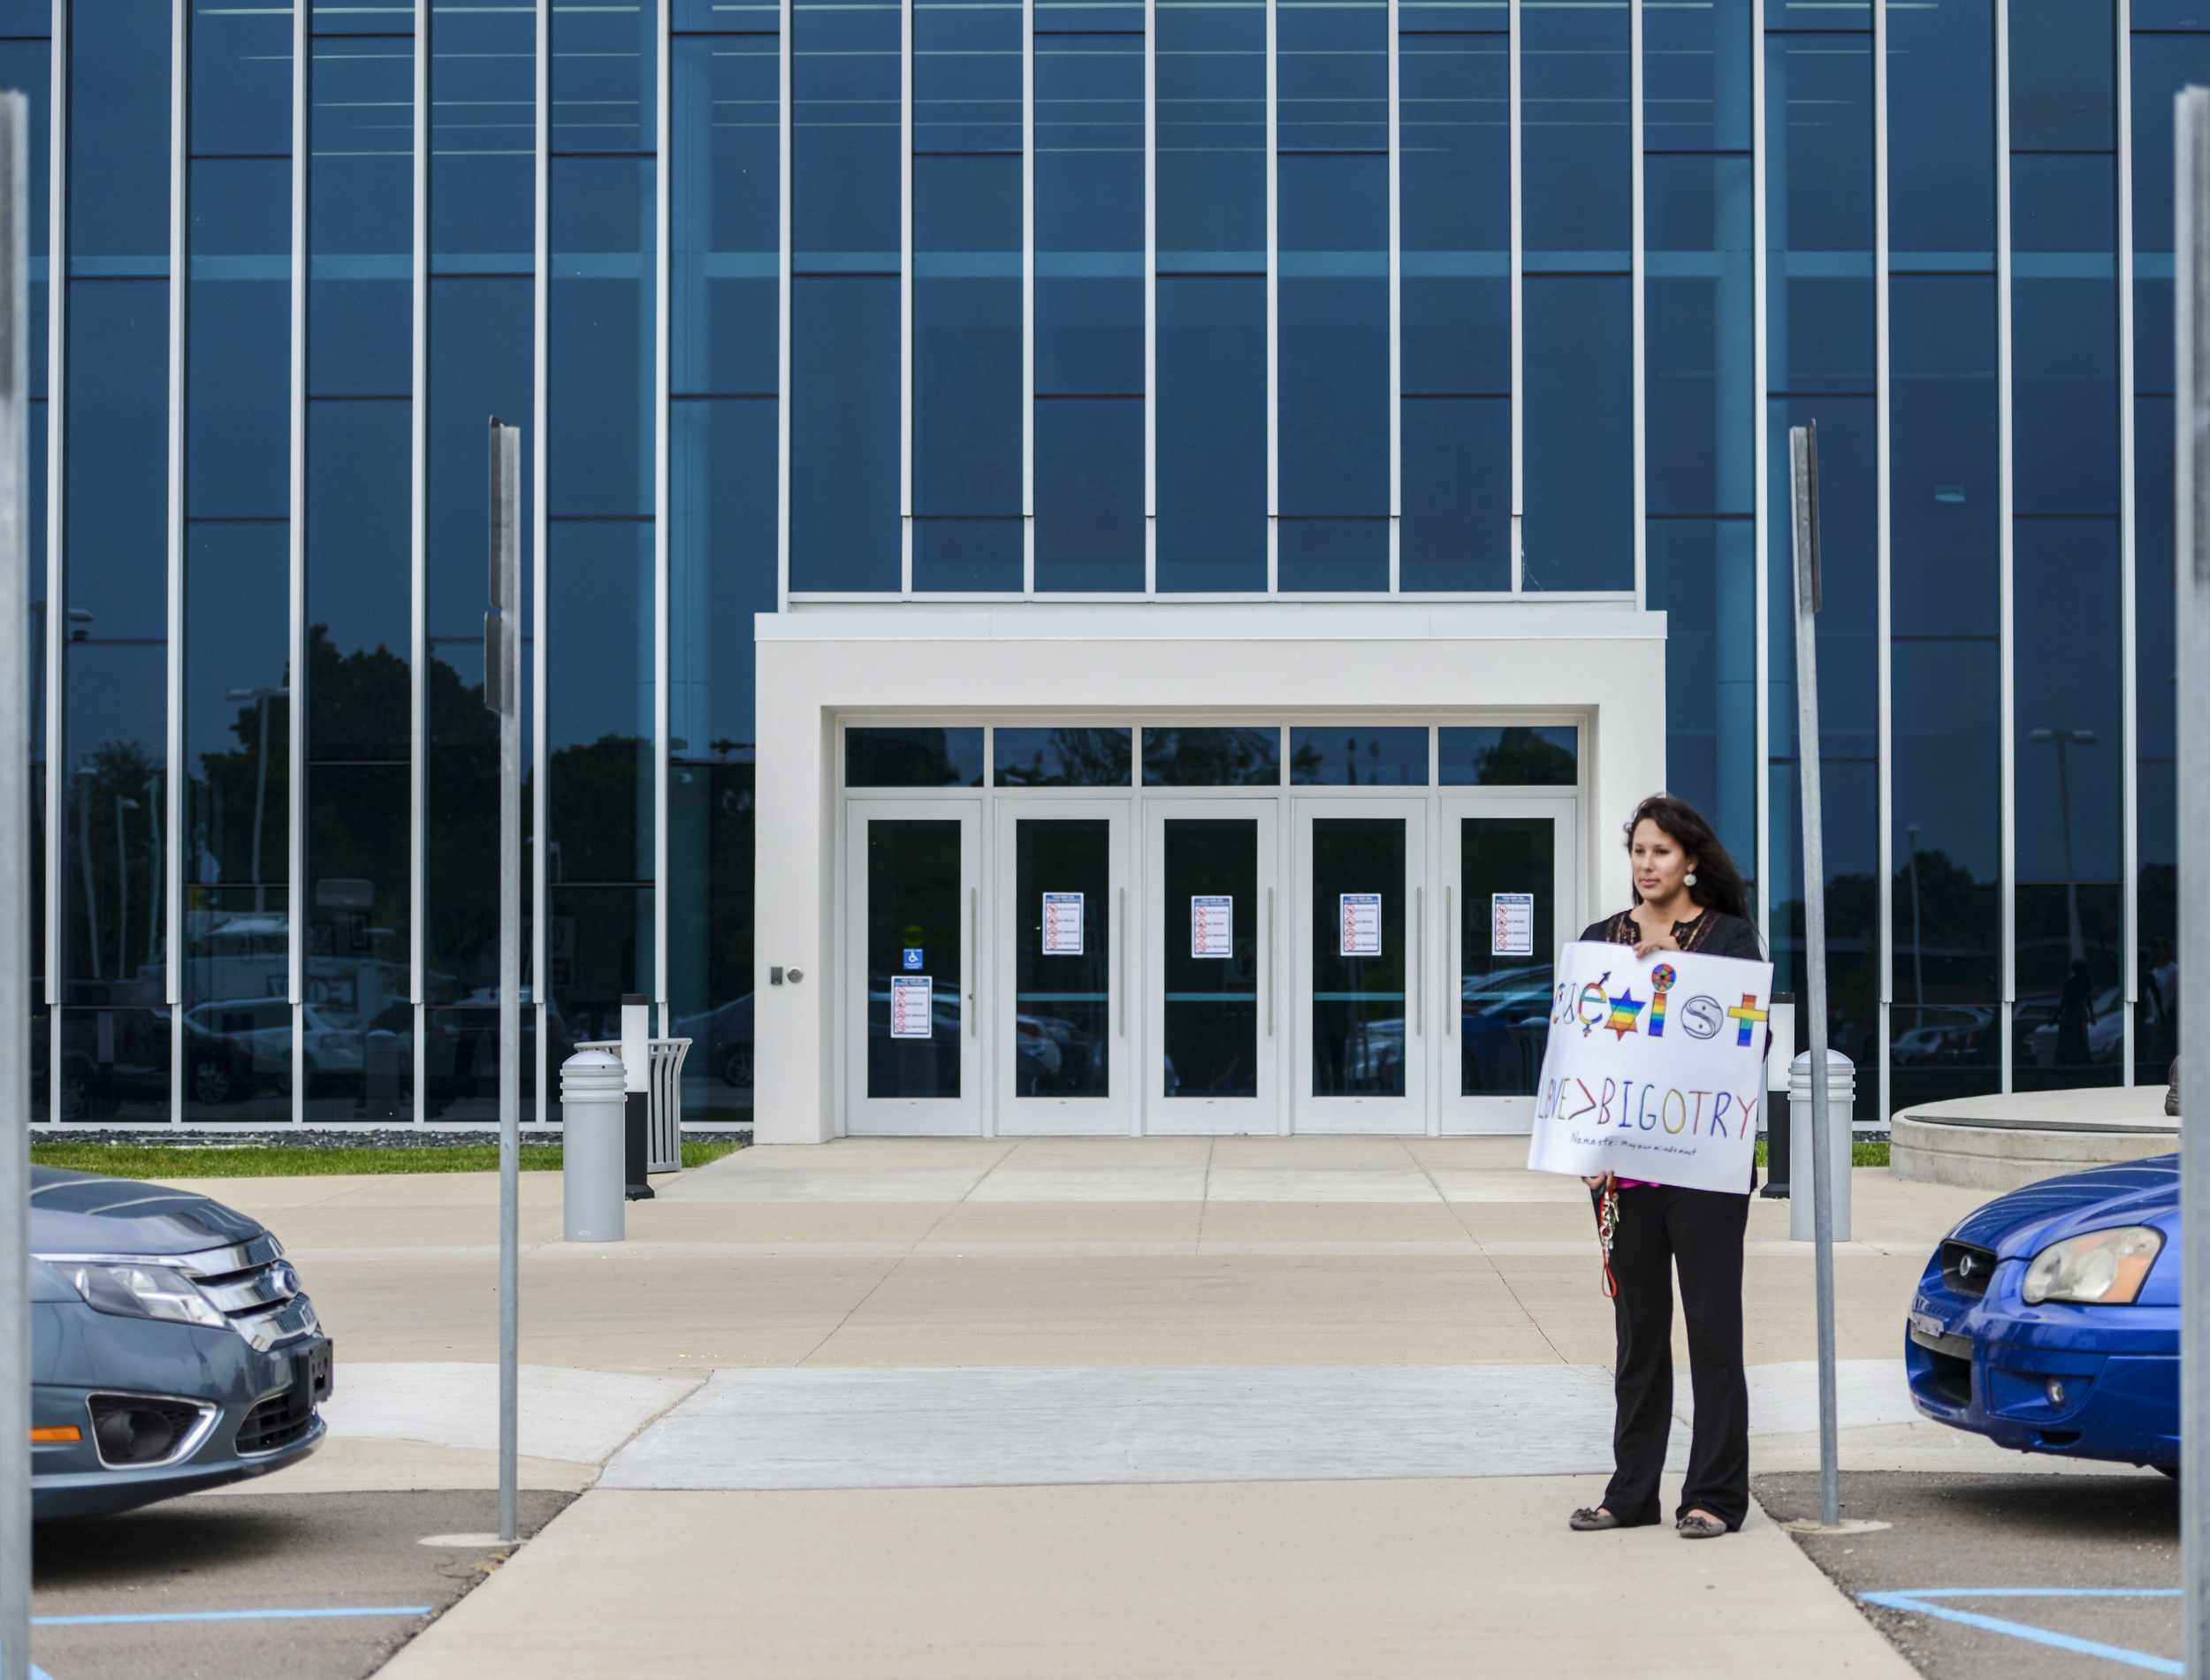  Freeport resident, Maya Esparza-Siegers, stands by the entrance of the Jenison Center for the Arts, with a sign during a peaceful protest towards owner of Dieseltec, Brian Klawiter's event to discuss "the true state of the Union" Thursday, June 11, 